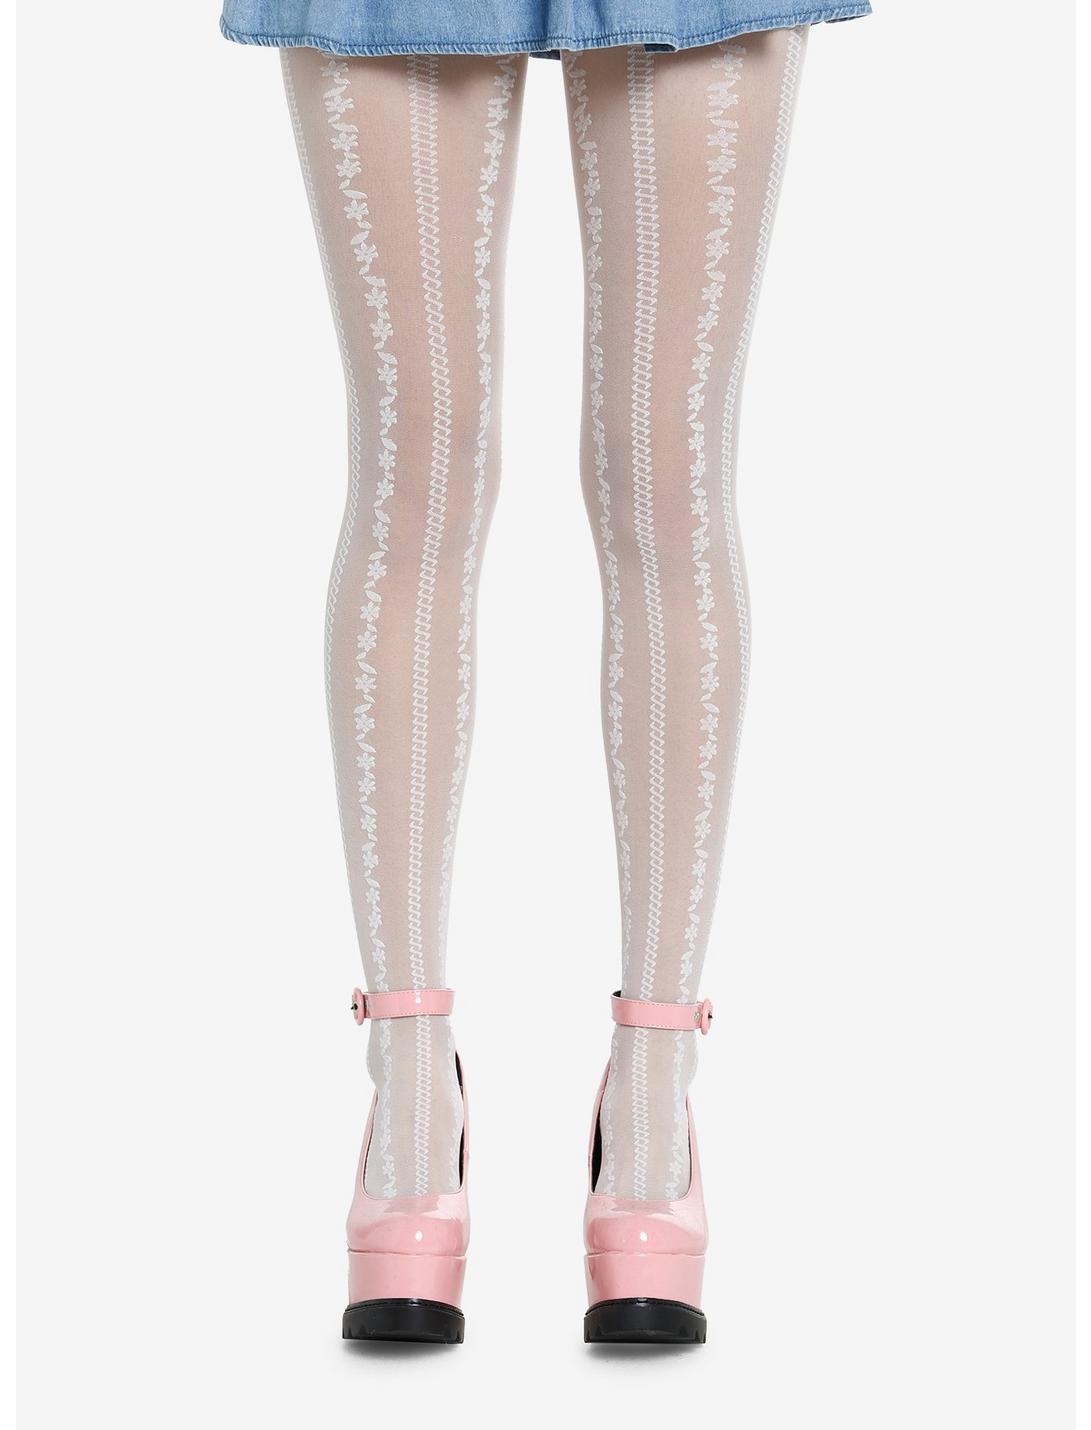 Cream Floral Detail Tights | Hot Topic